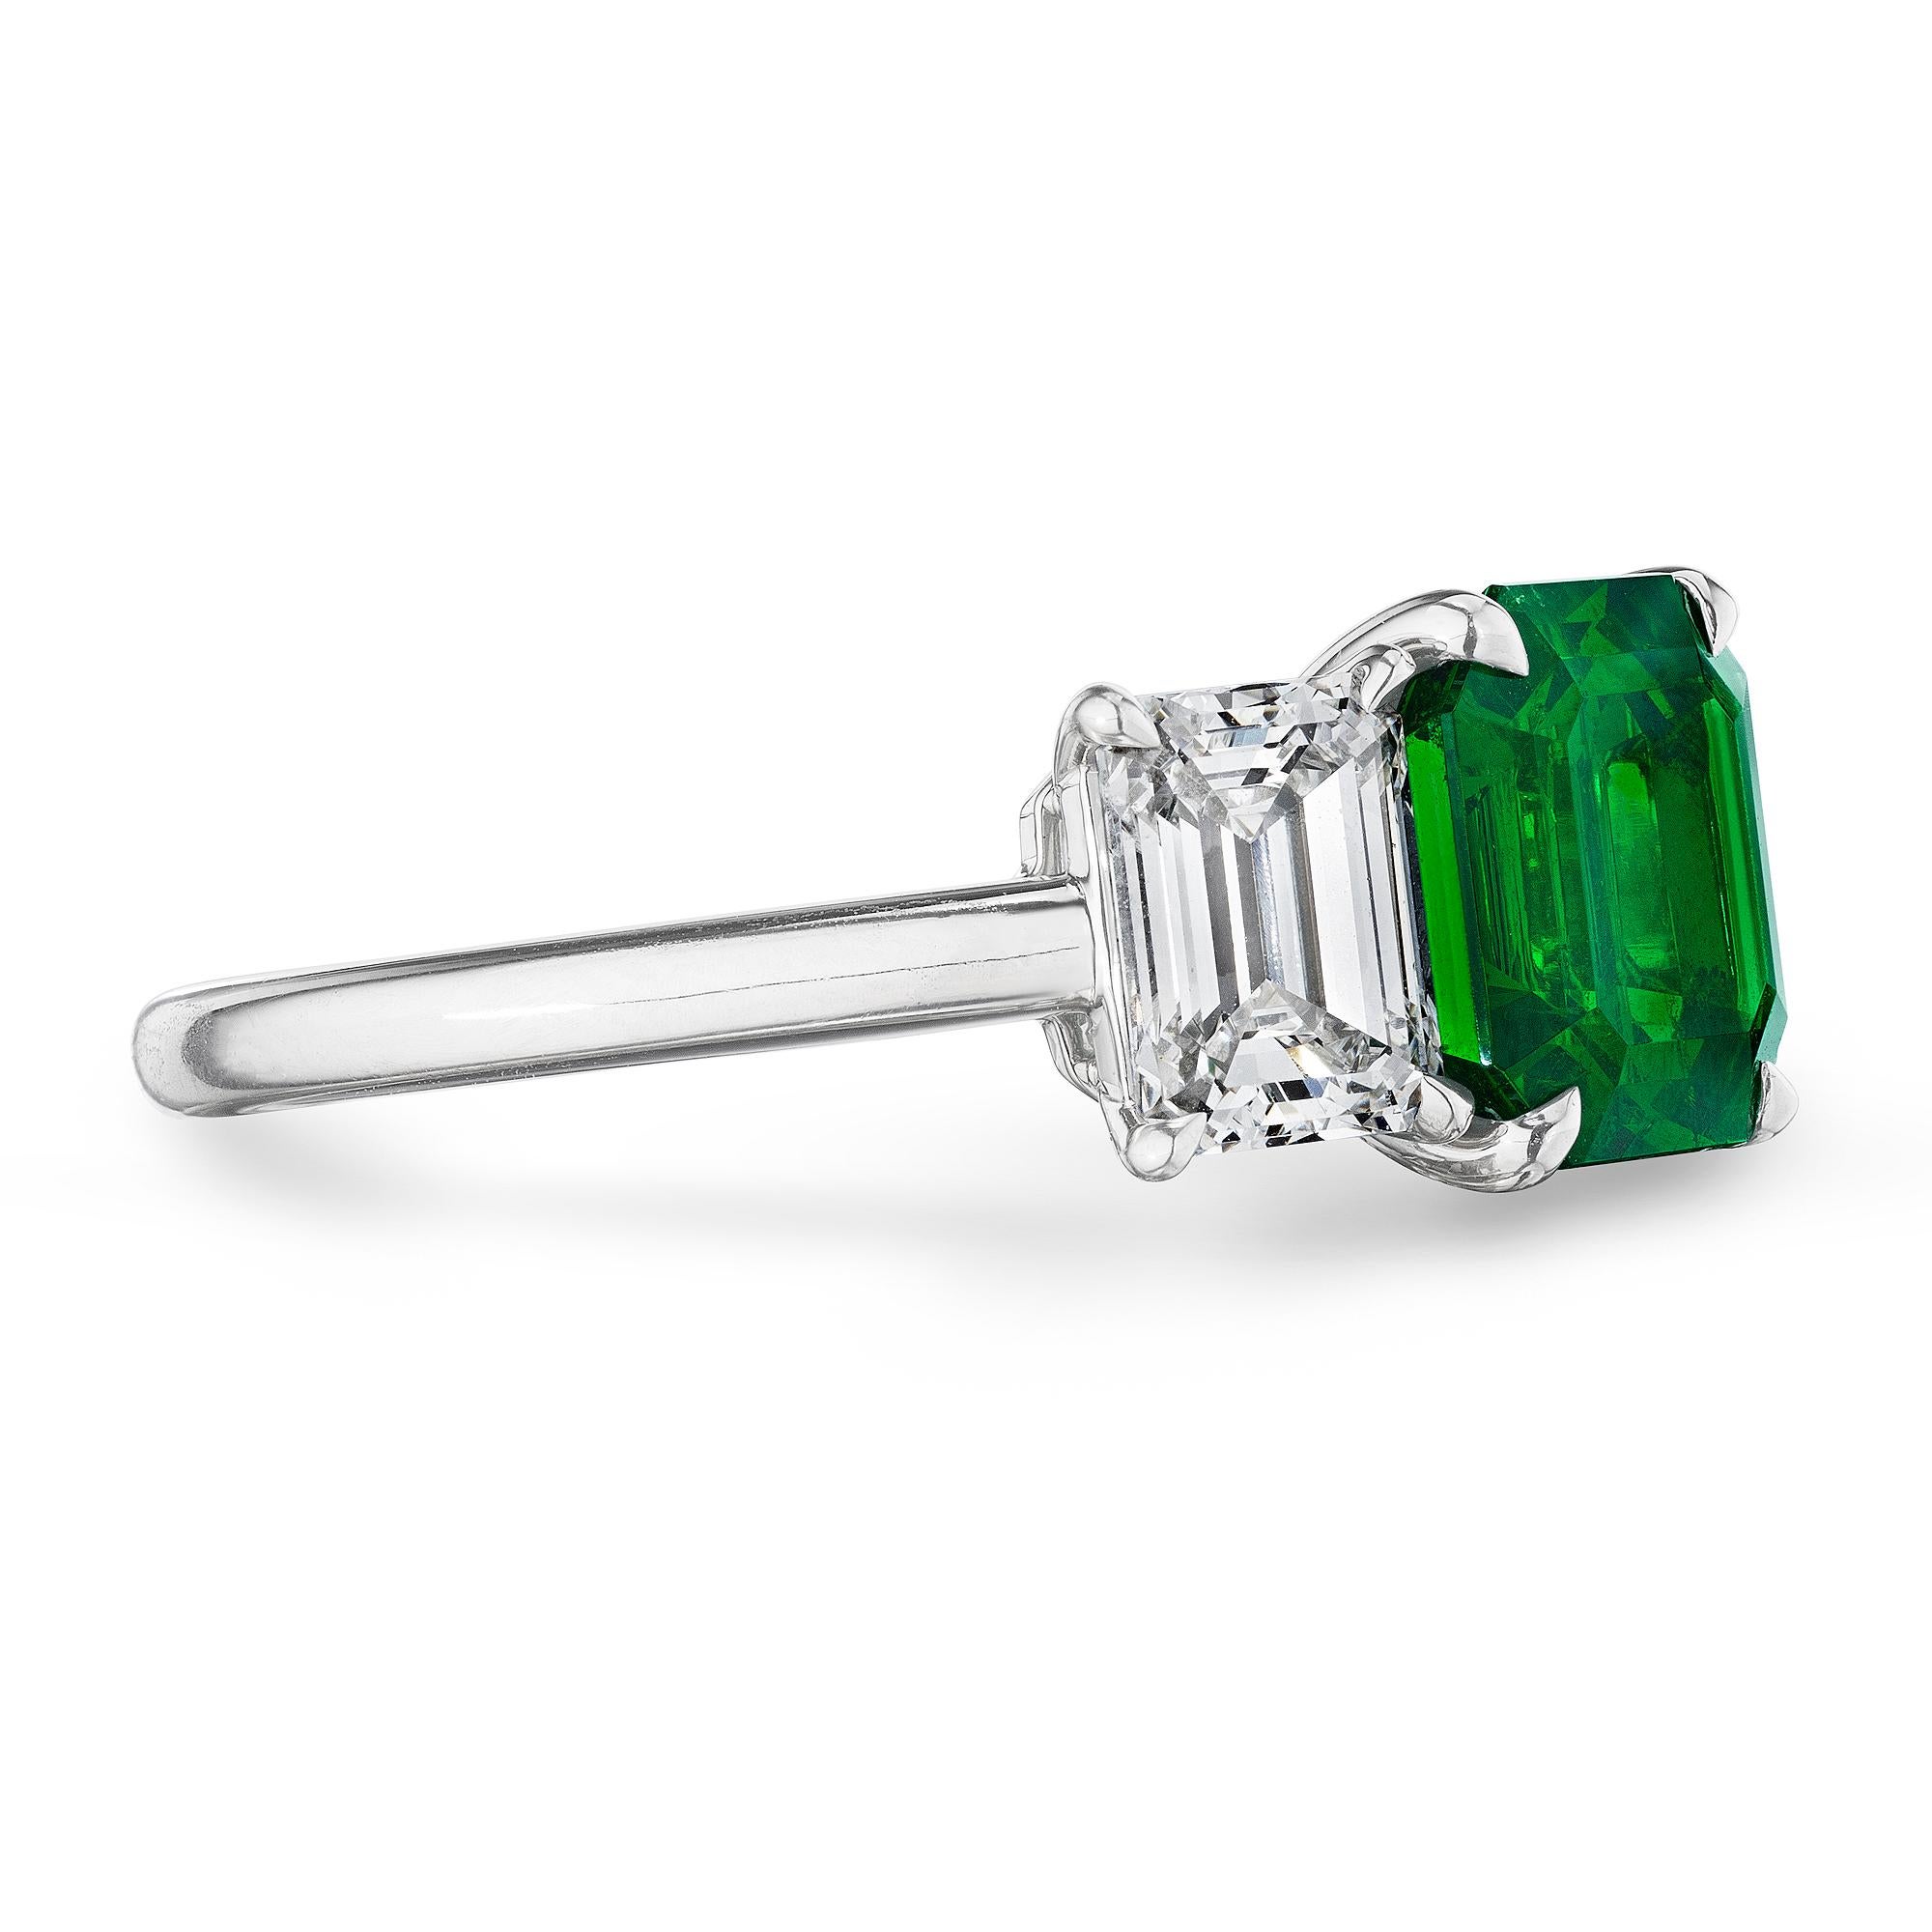 This extraordinary 2.52 carat natural no oil Colombian square cut emerald ring is simply mesmerizing.  The AGL certified square emerald cut center stone is a breathtaking luscious vivid green with two GIA certified icy white emerald cut diamond side